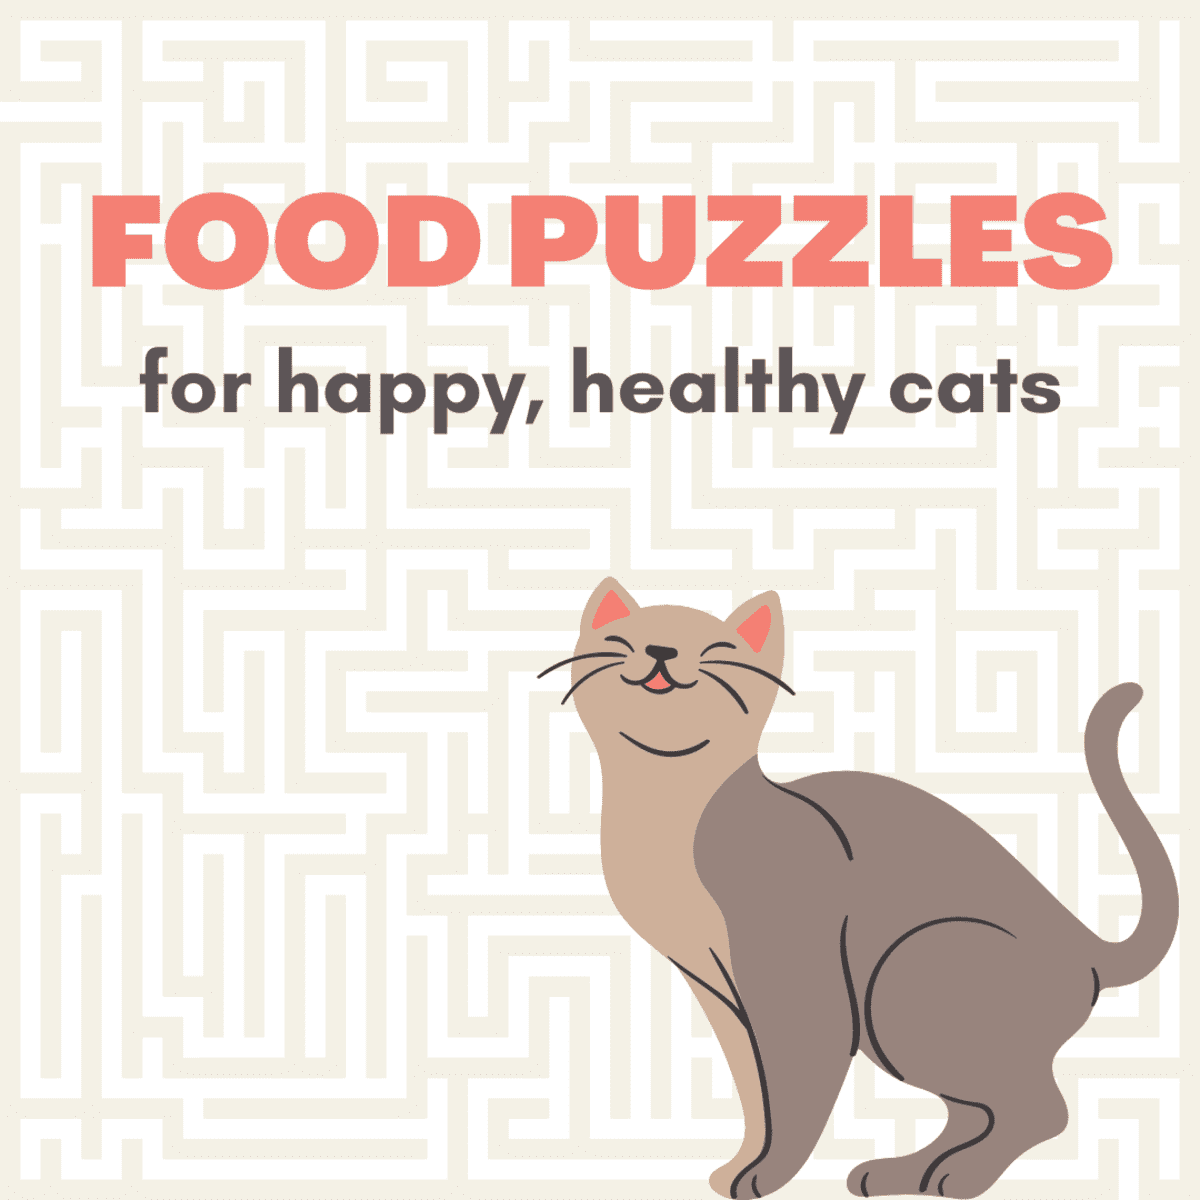 Cat Food Puzzles Improve Feline Health and Wellbeing